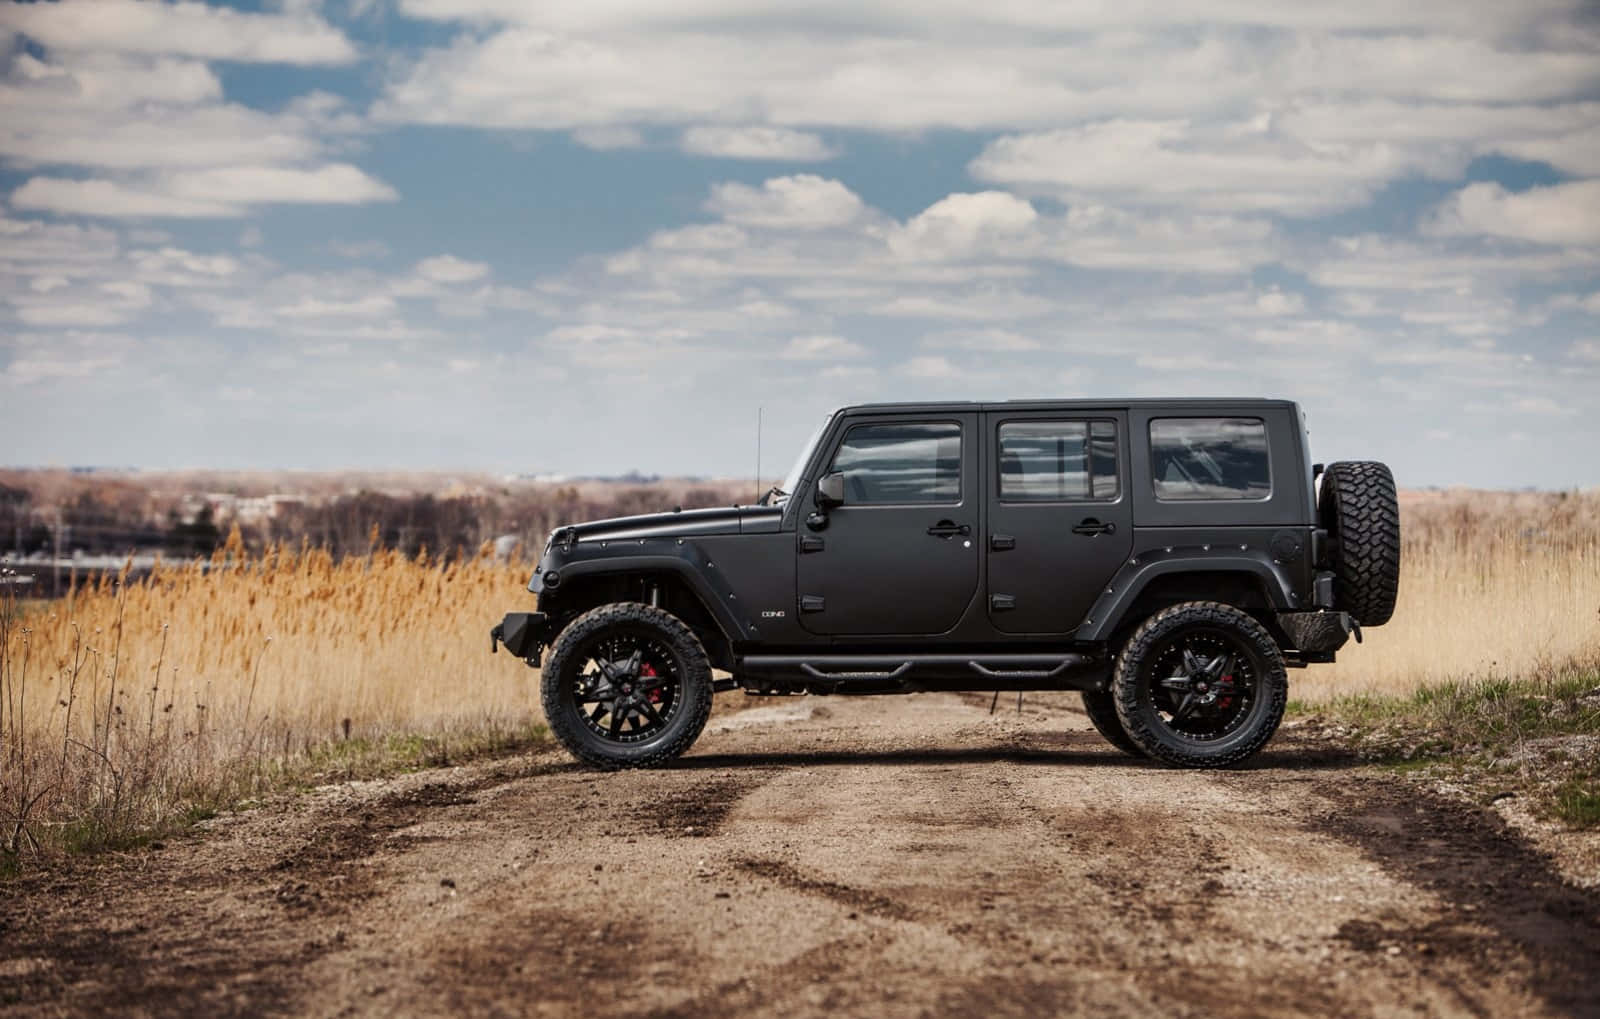 Power, Capability and Style in a Black Jeep